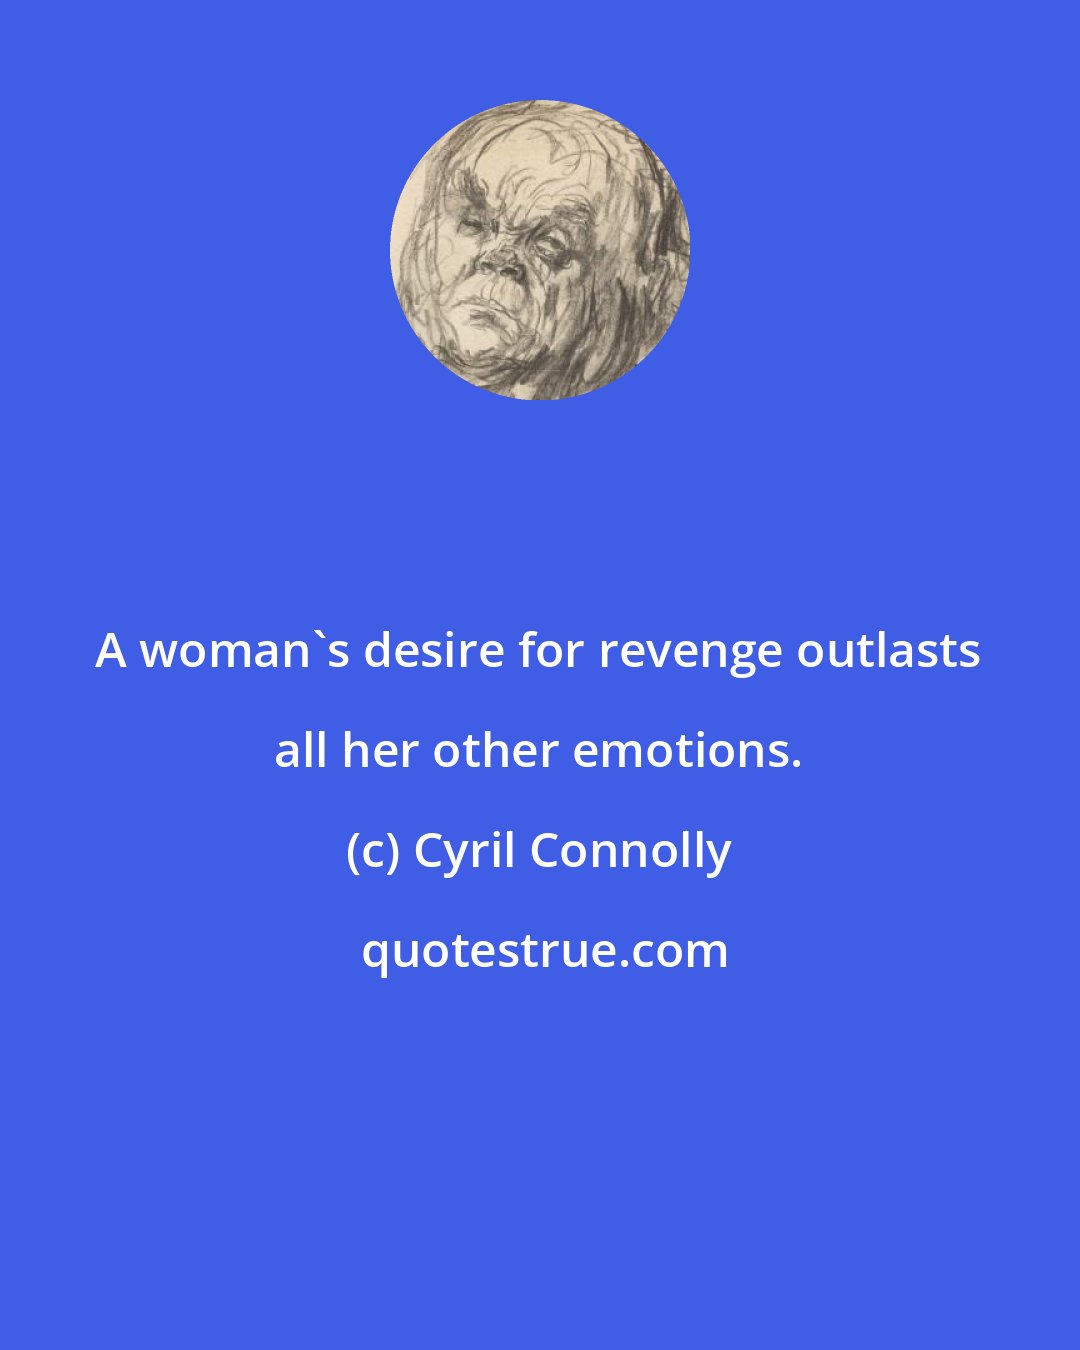 Cyril Connolly: A woman's desire for revenge outlasts all her other emotions.